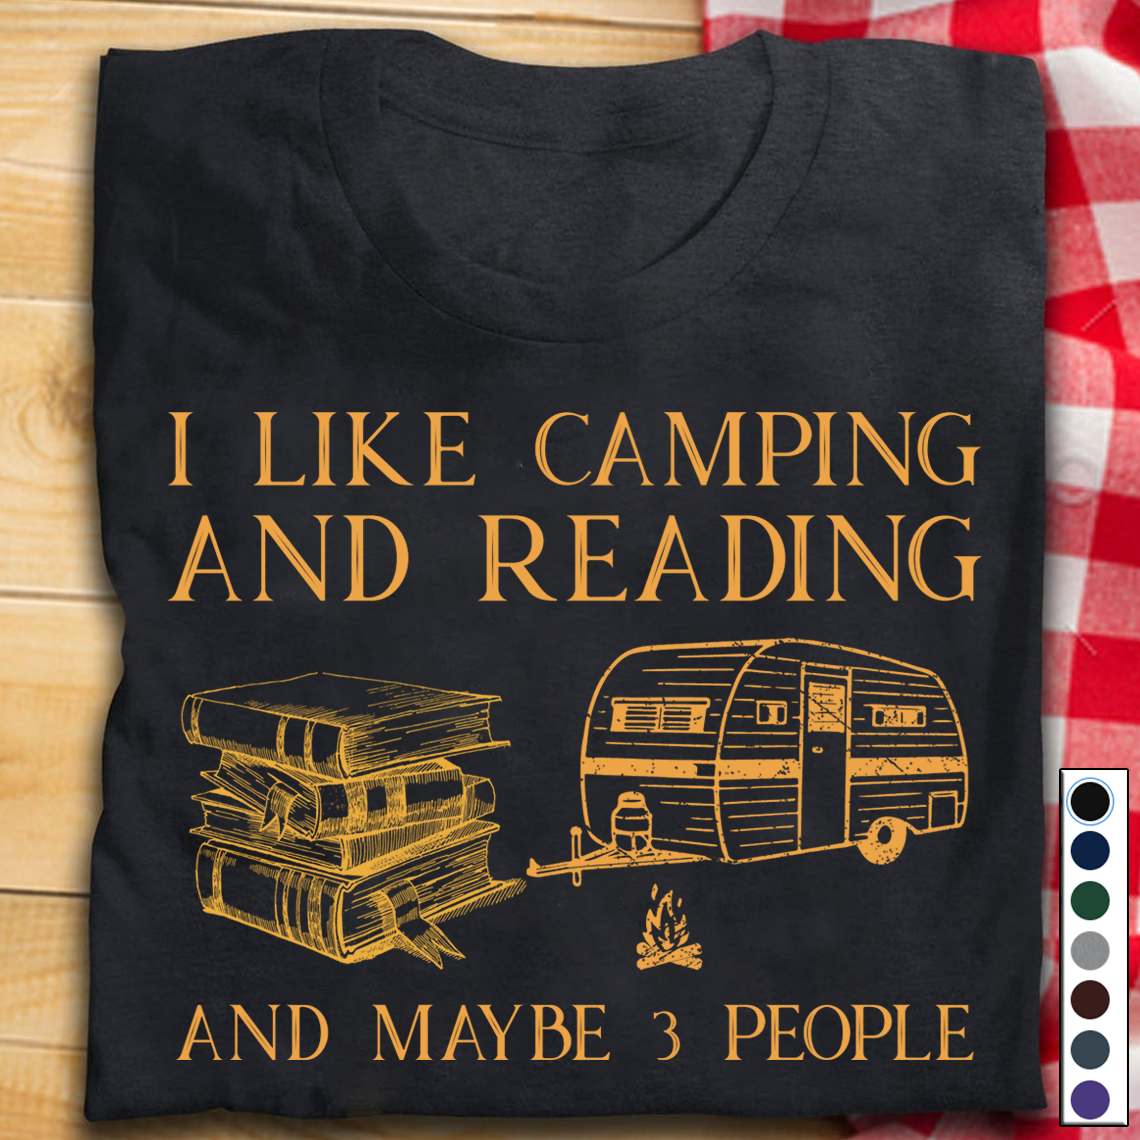 I like camping and reading and maybe 3 people - Camping car and books